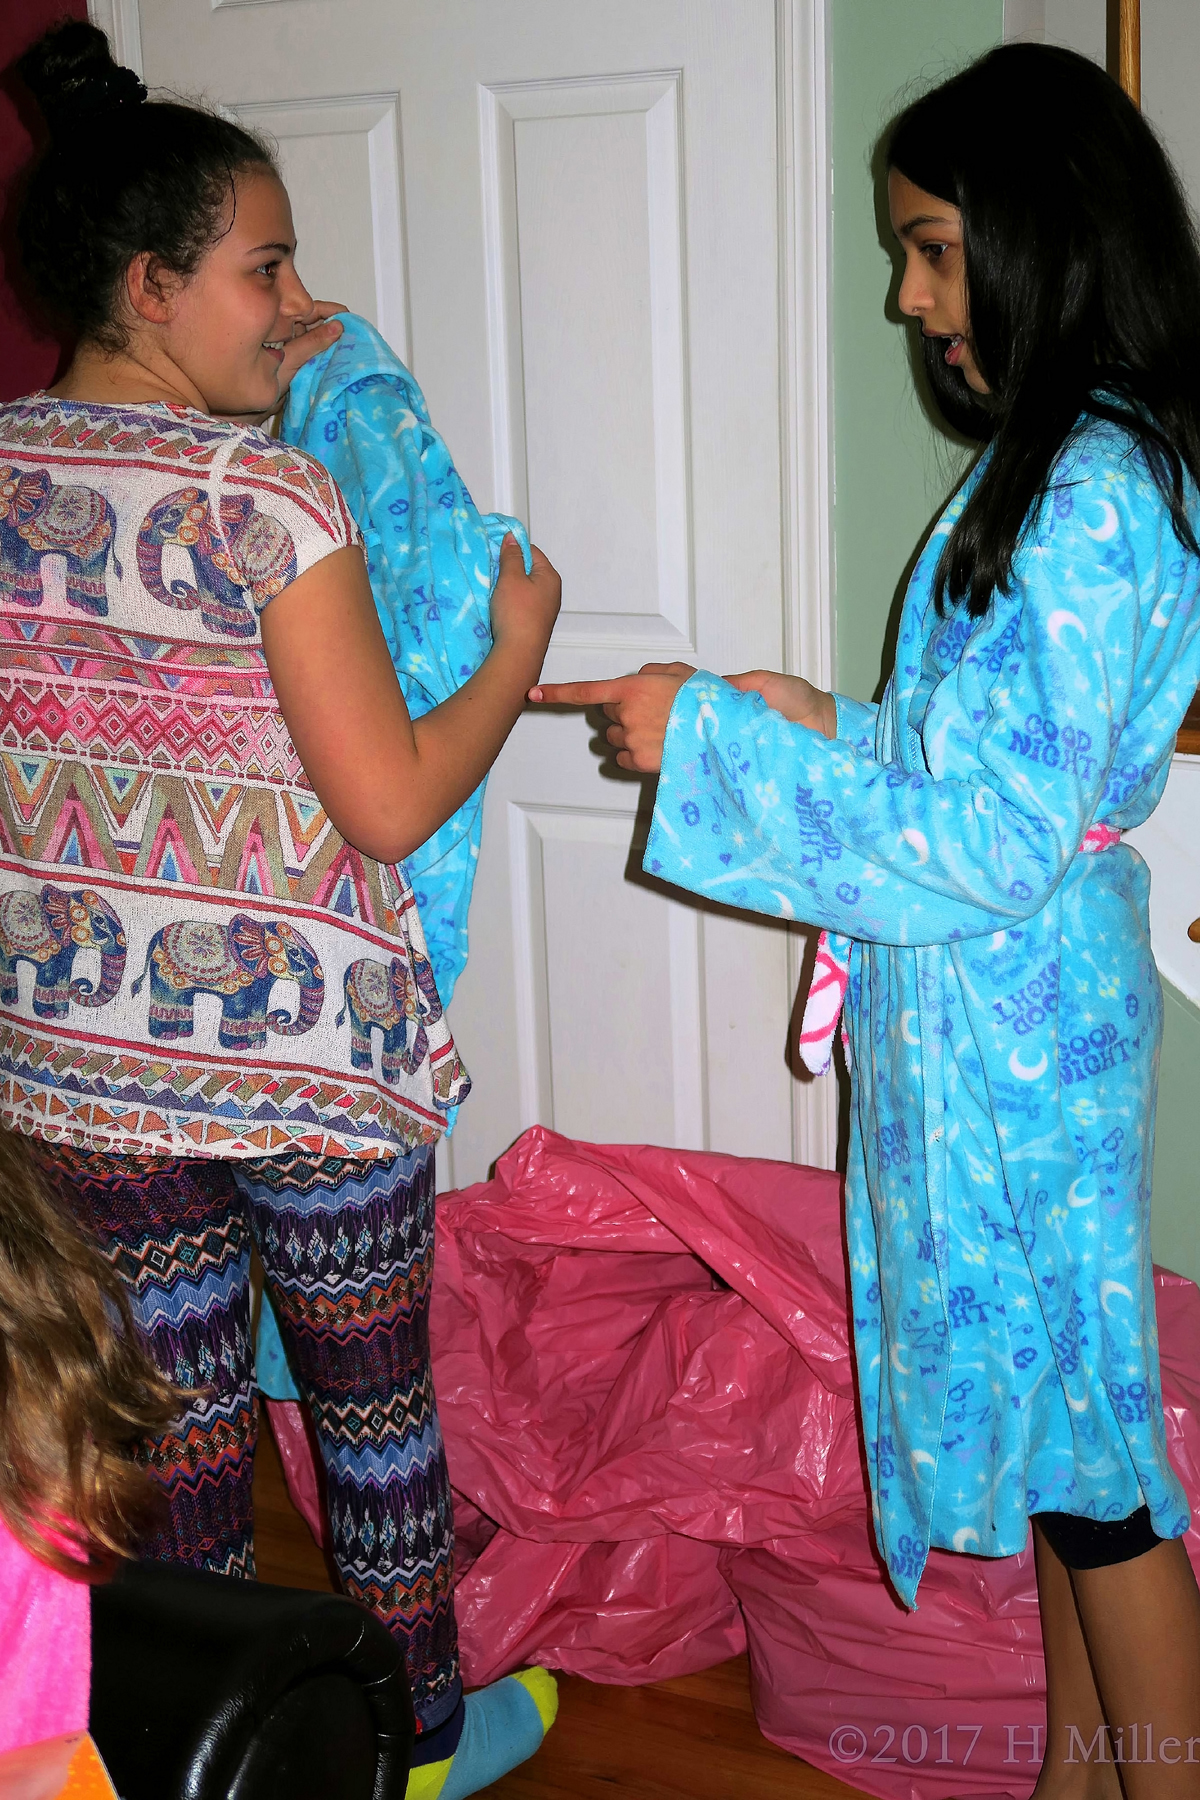 Isabella Is Helping Her Friend With Her Spa Robe 